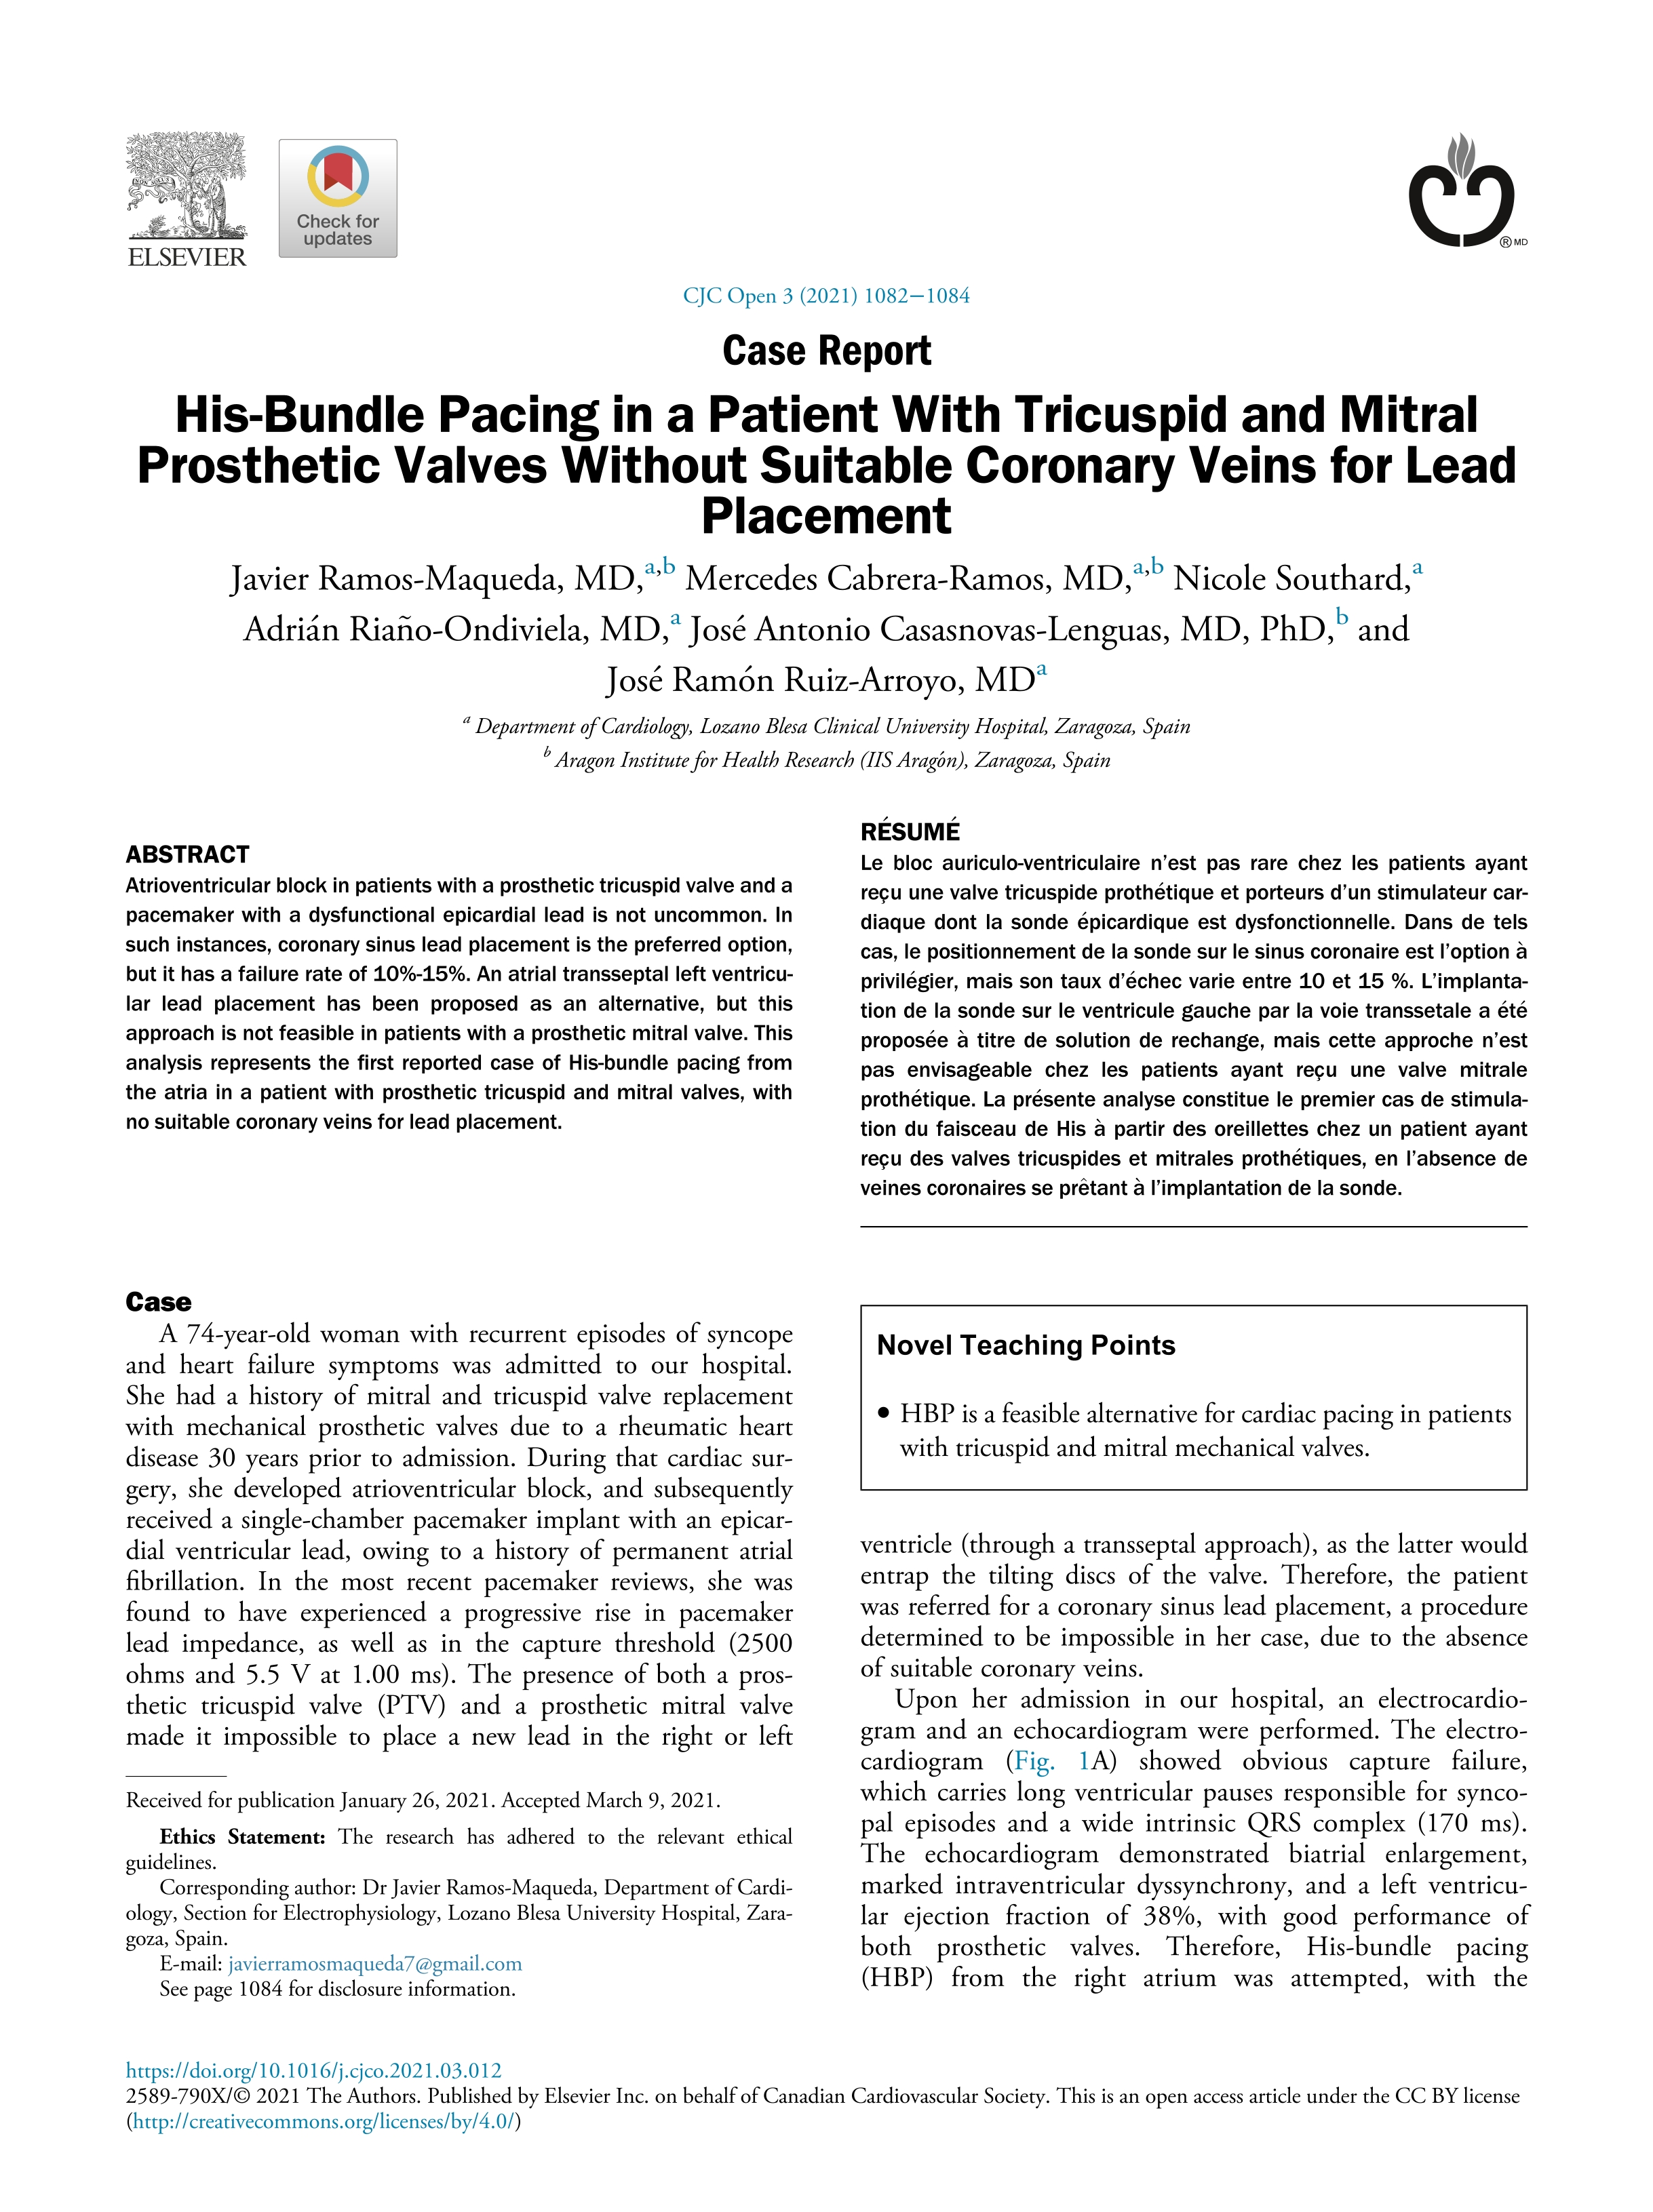 His-Bundle Pacing in a Patient With Tricuspid and Mitral Prosthetic Valves Without Suitable Coronary Veins for Lead Placement